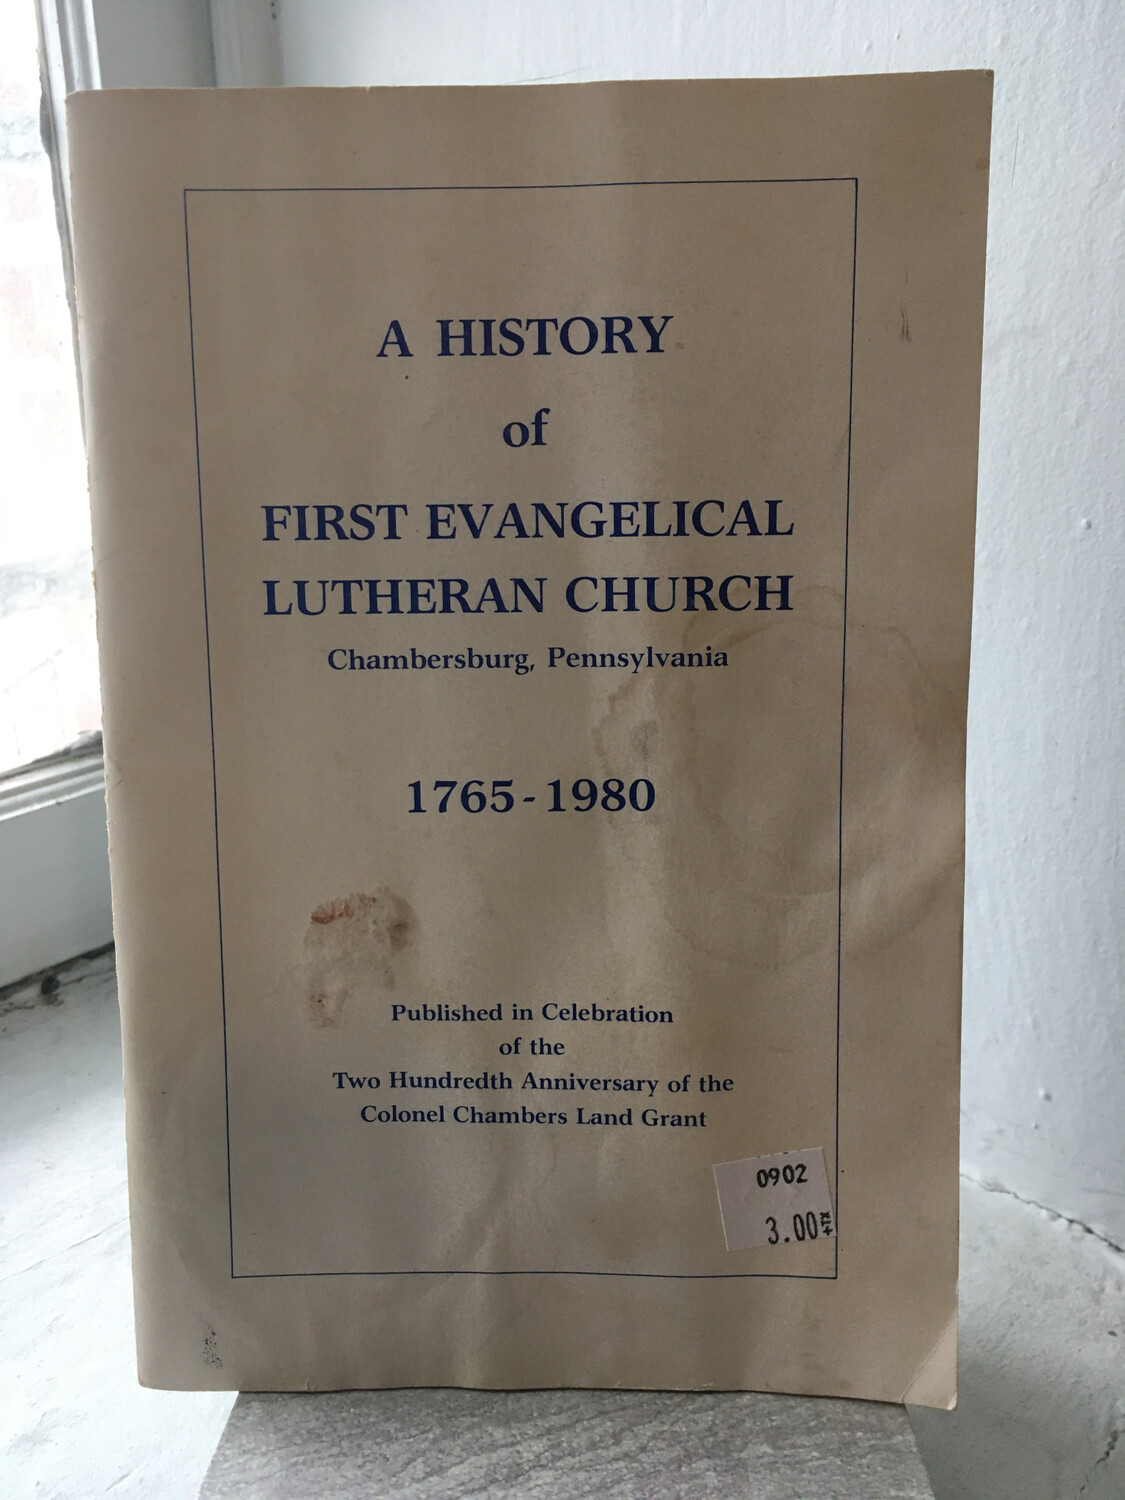 A History of First Evangelical Lutheran Church